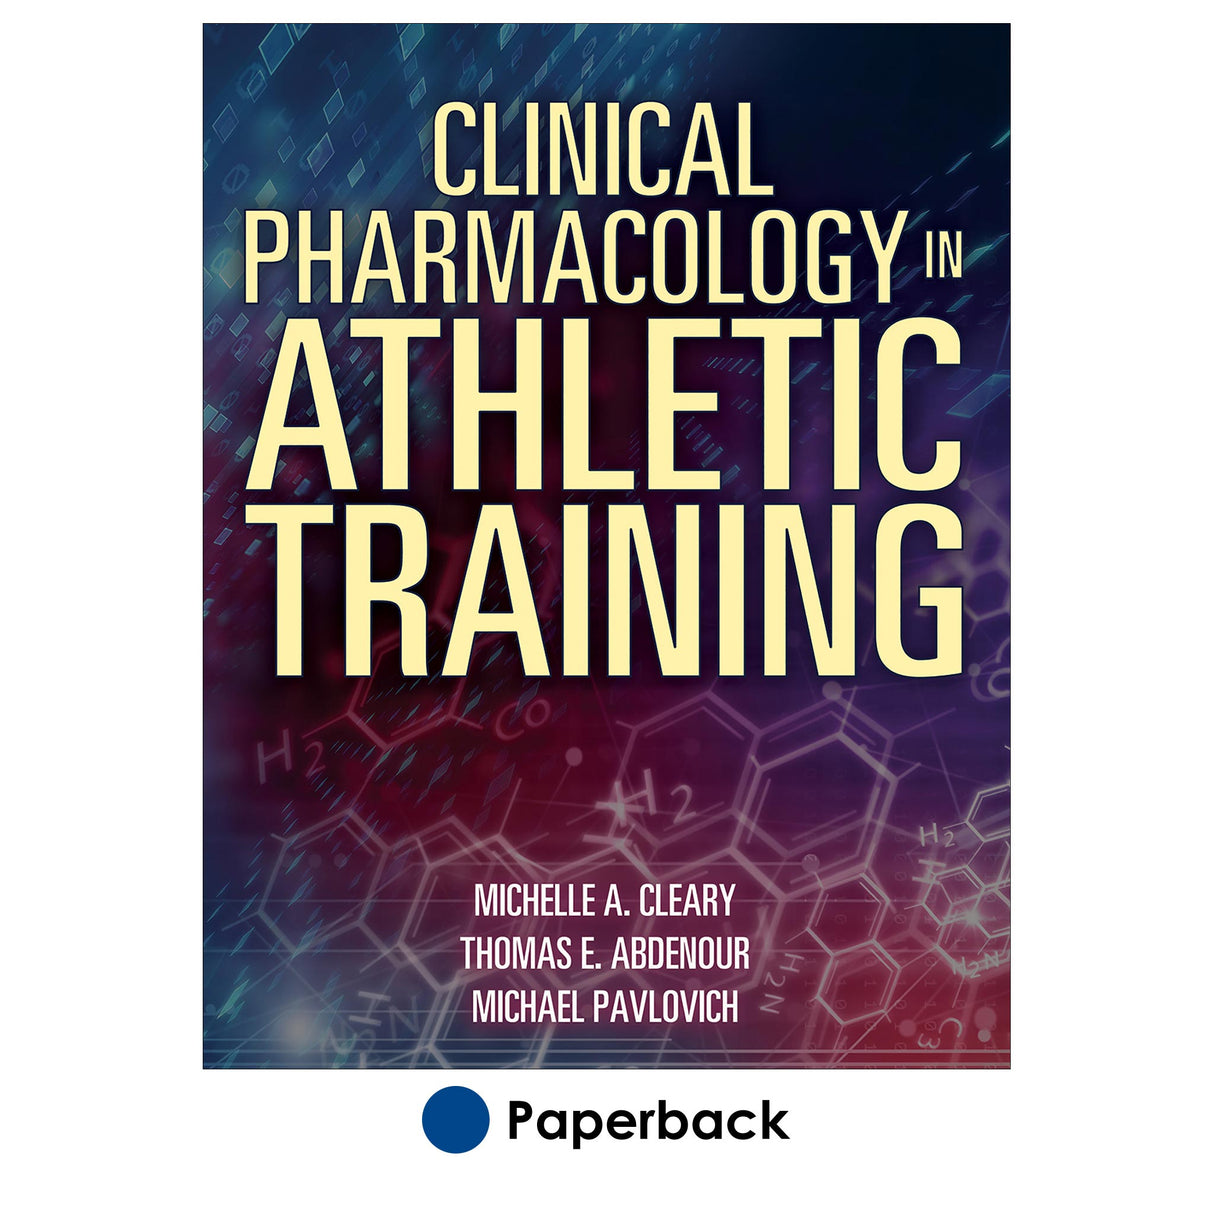 Clinical Pharmacology in Athletic Training